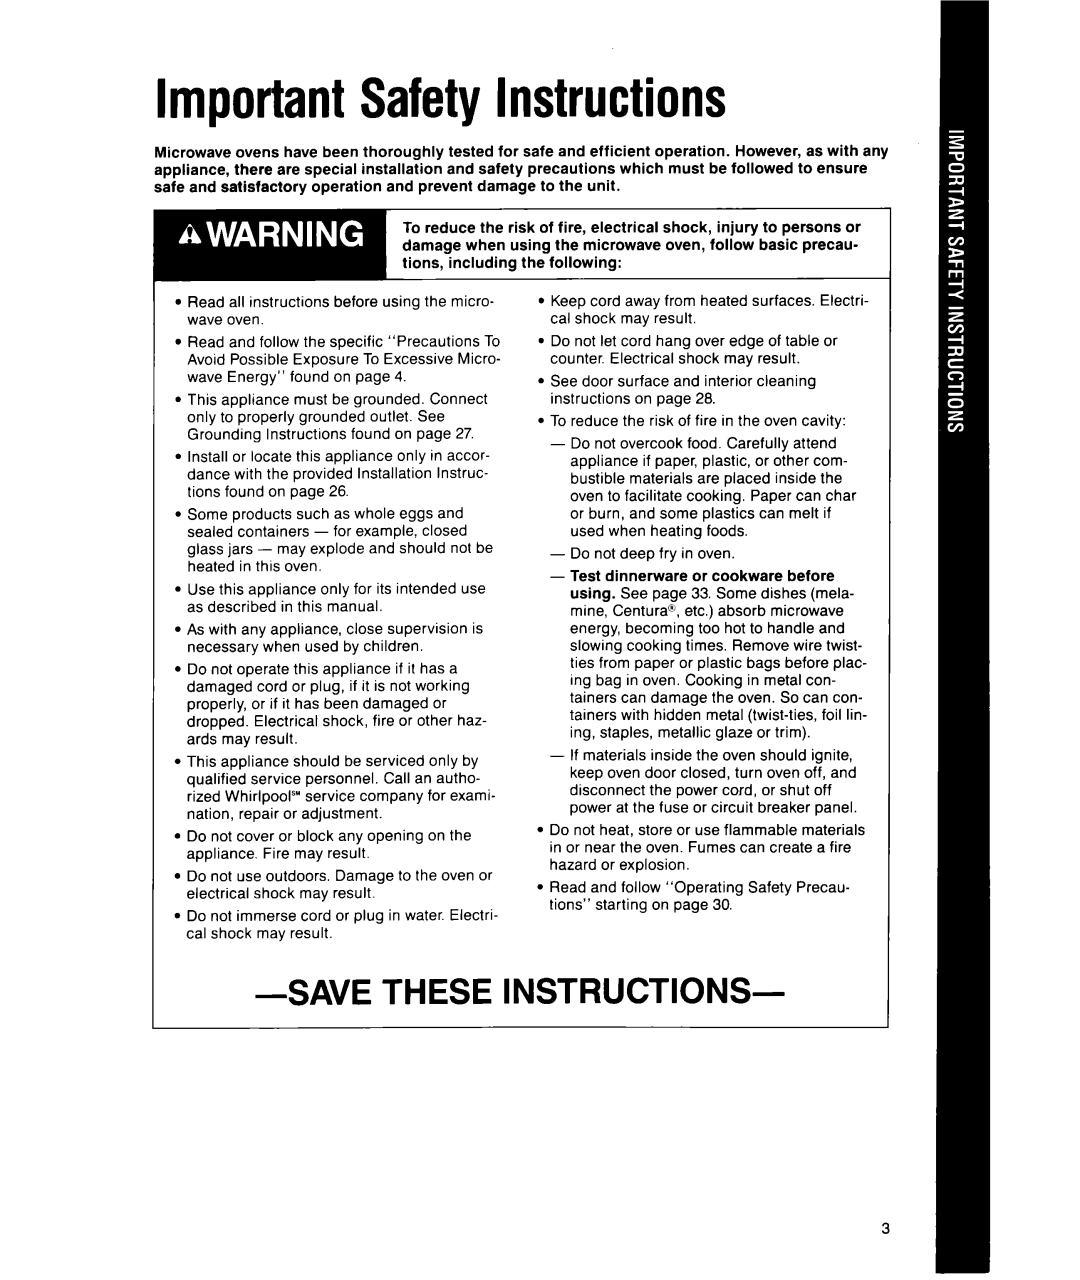 Whirlpool MS1451XWI, MS1650XW manual Important Safety Instructions, Savethese Instructions 